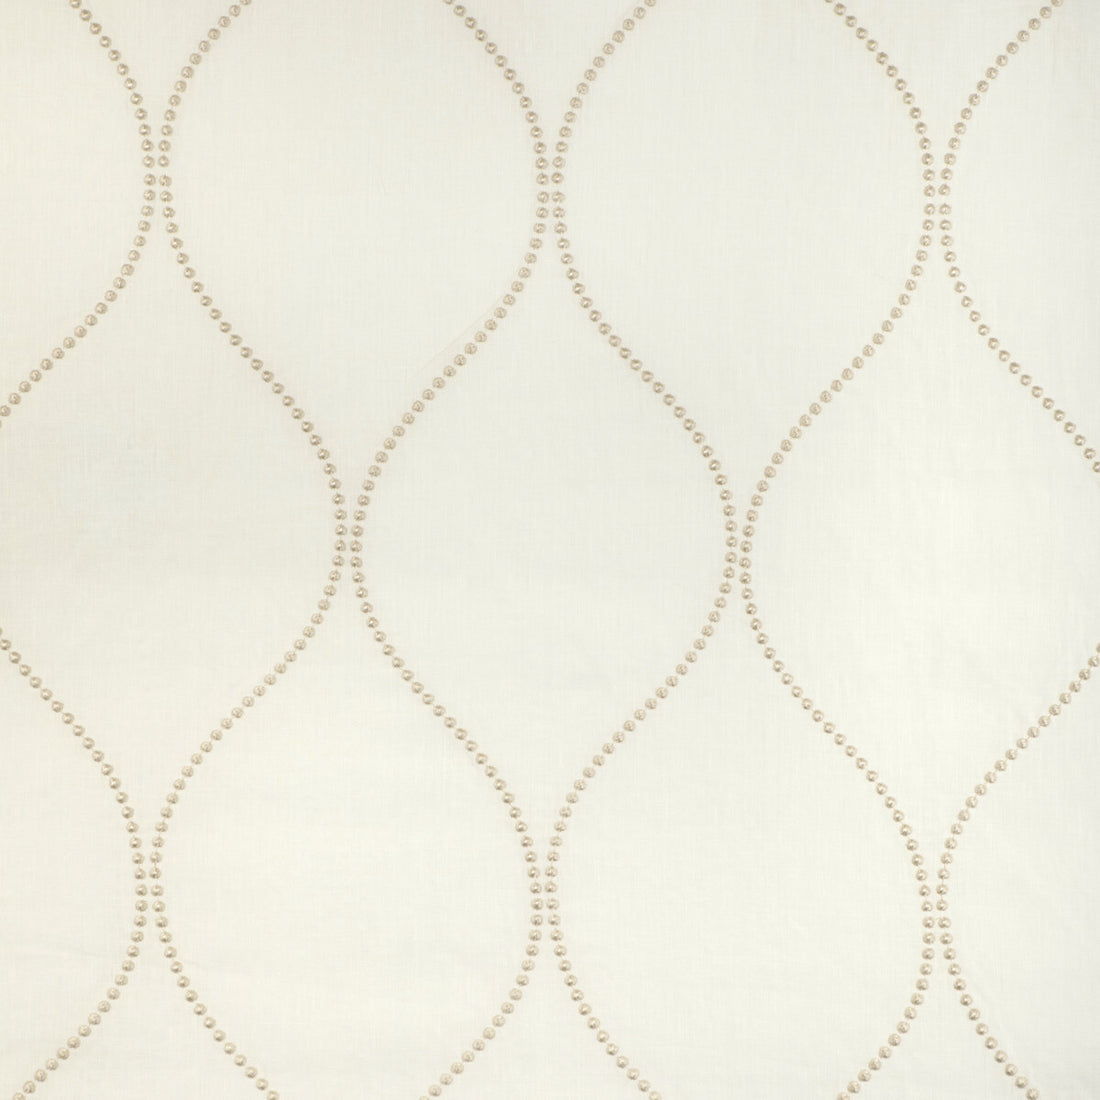 Kravet Design fabric in 4004-1101 color - pattern 4004.1101.0 - by Kravet Design in the Candice Olson collection